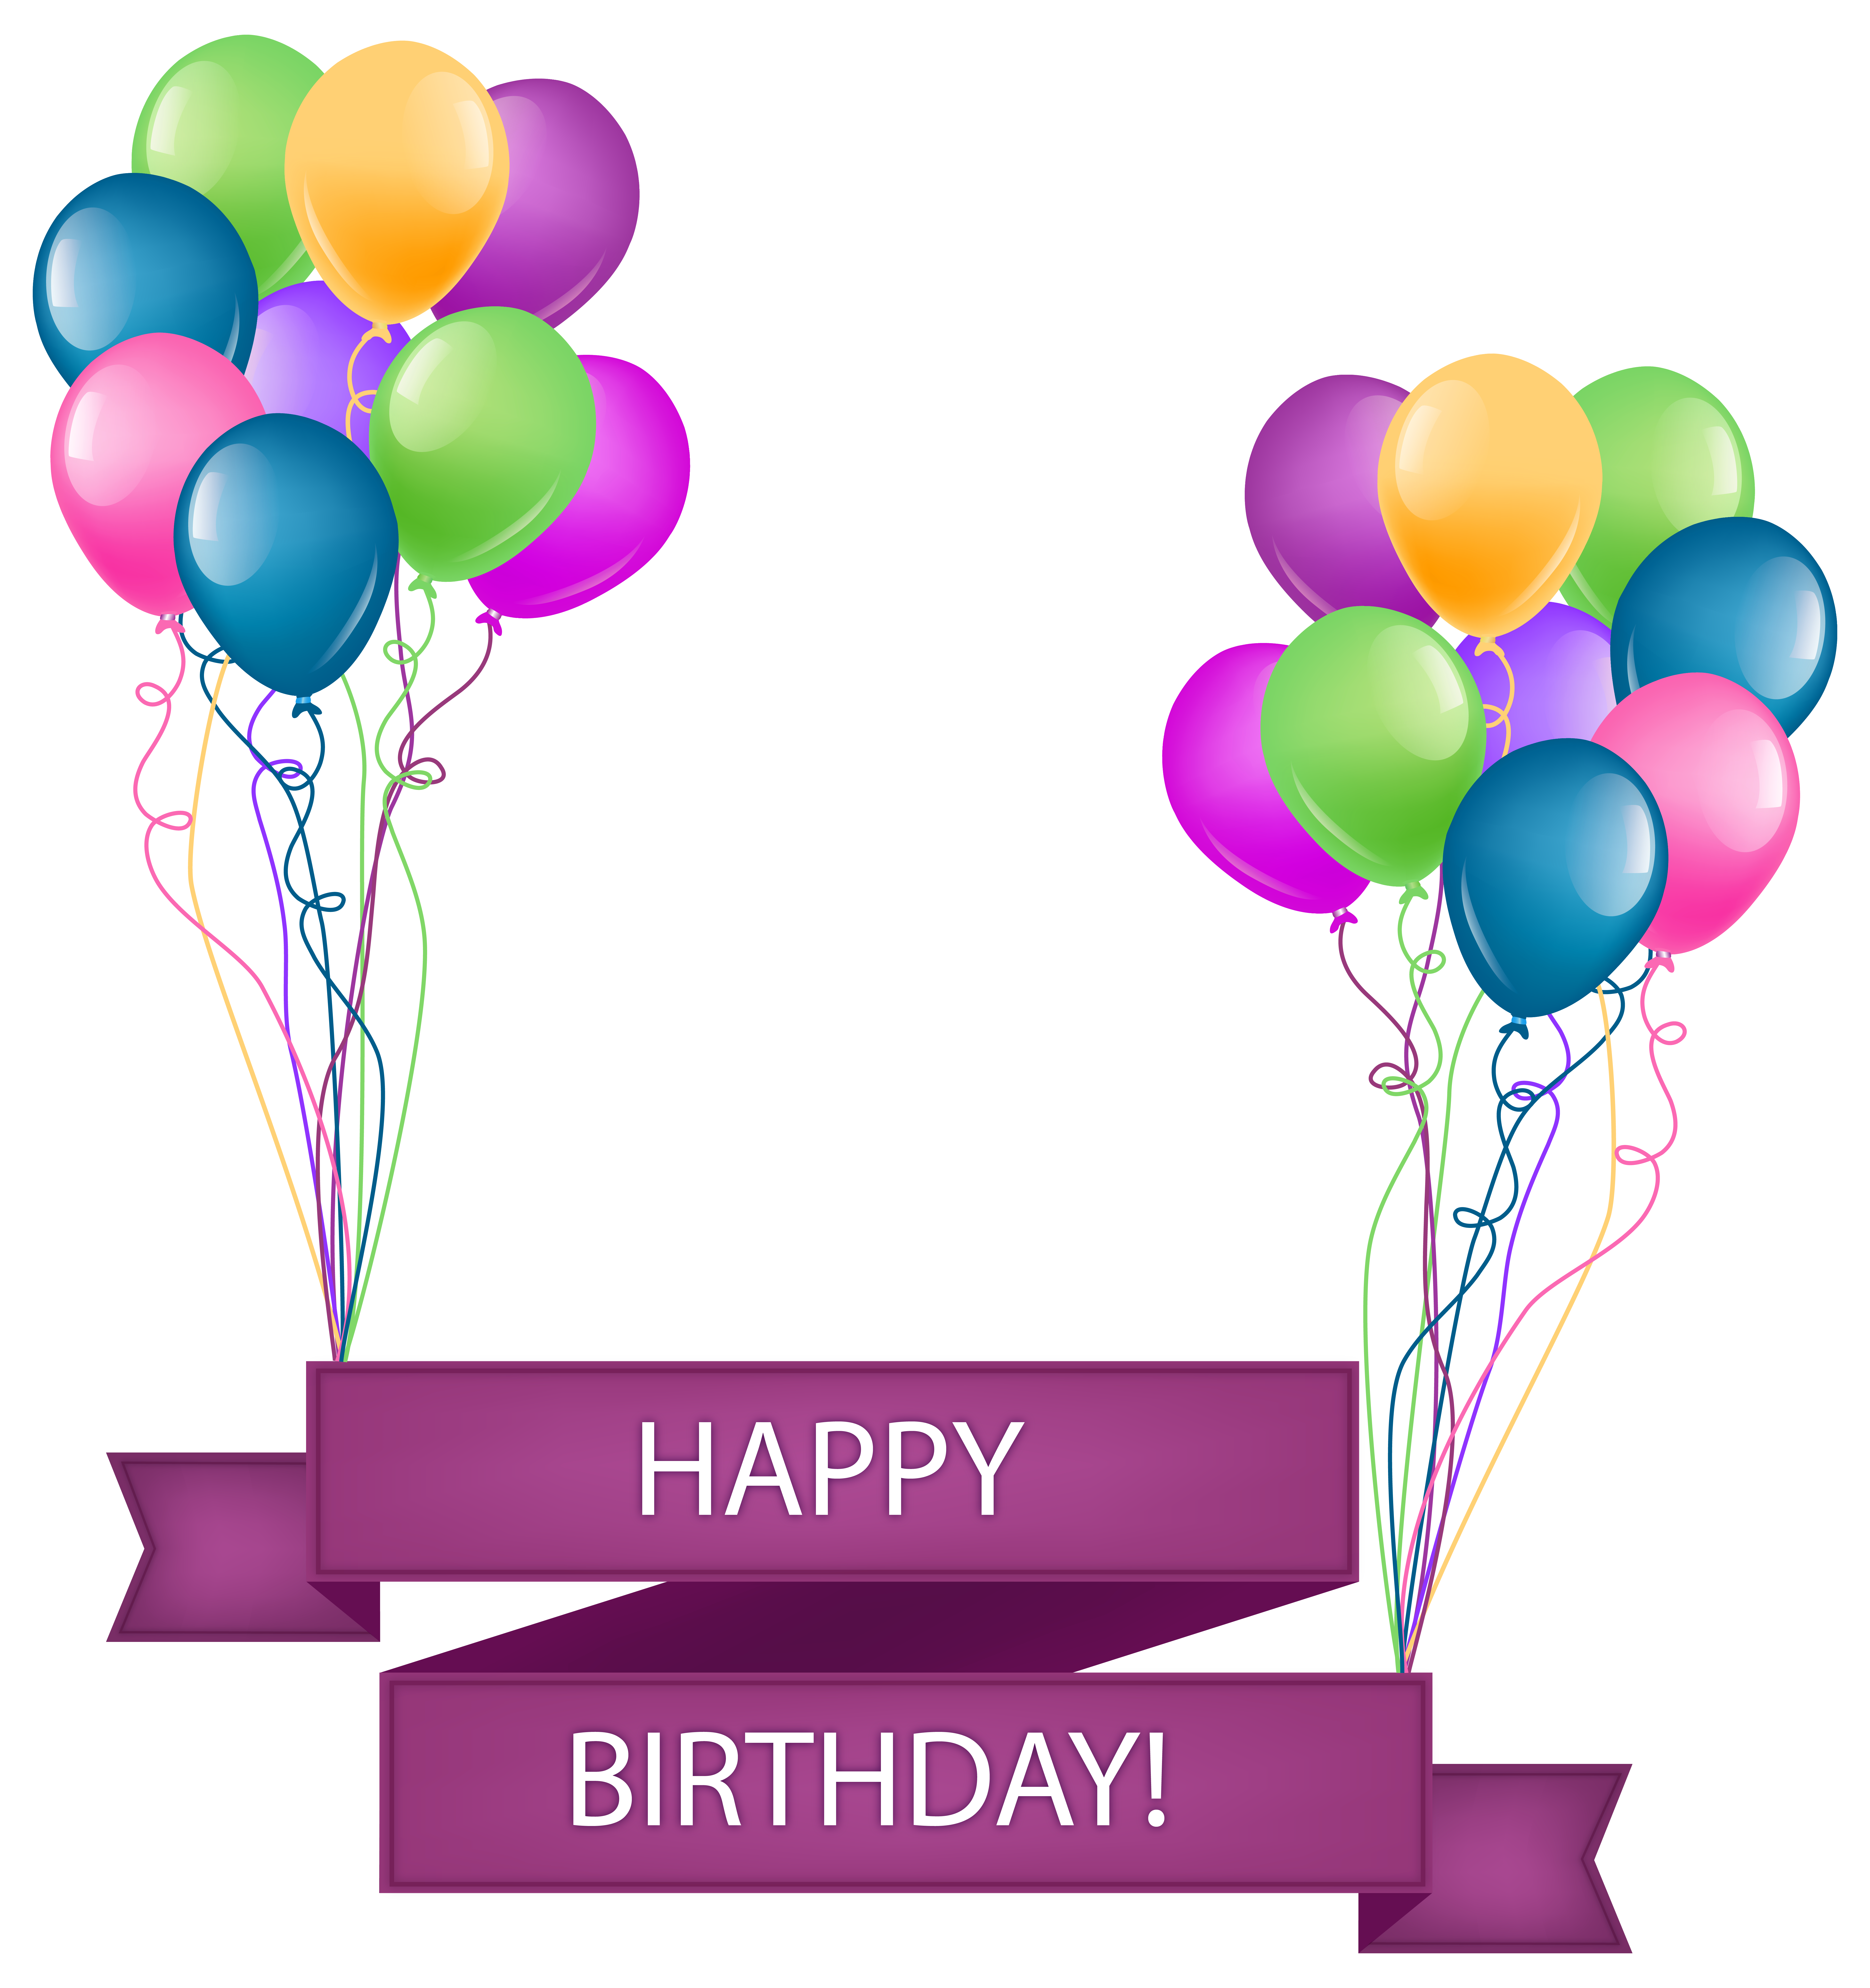 Happy Birthday Banner With Balloons Transparent PNG Clip Art Image Quality Image And Transparent PNG Free Clipart